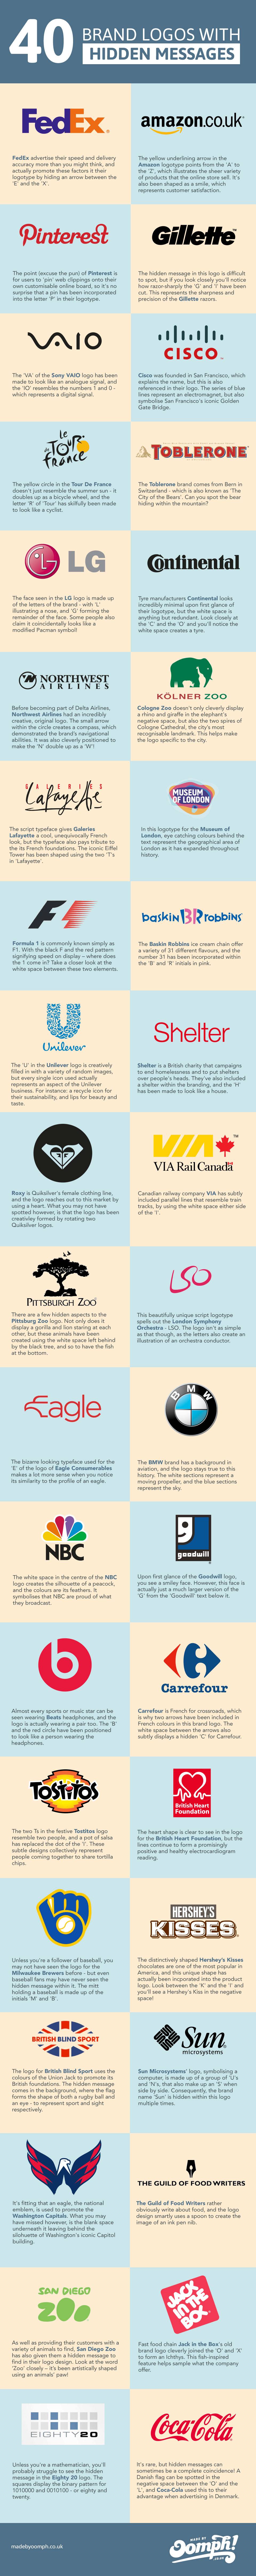 The Hidden Messages Behind These 40 Famous Brands&#8217; Logos Will Surely Surprise You